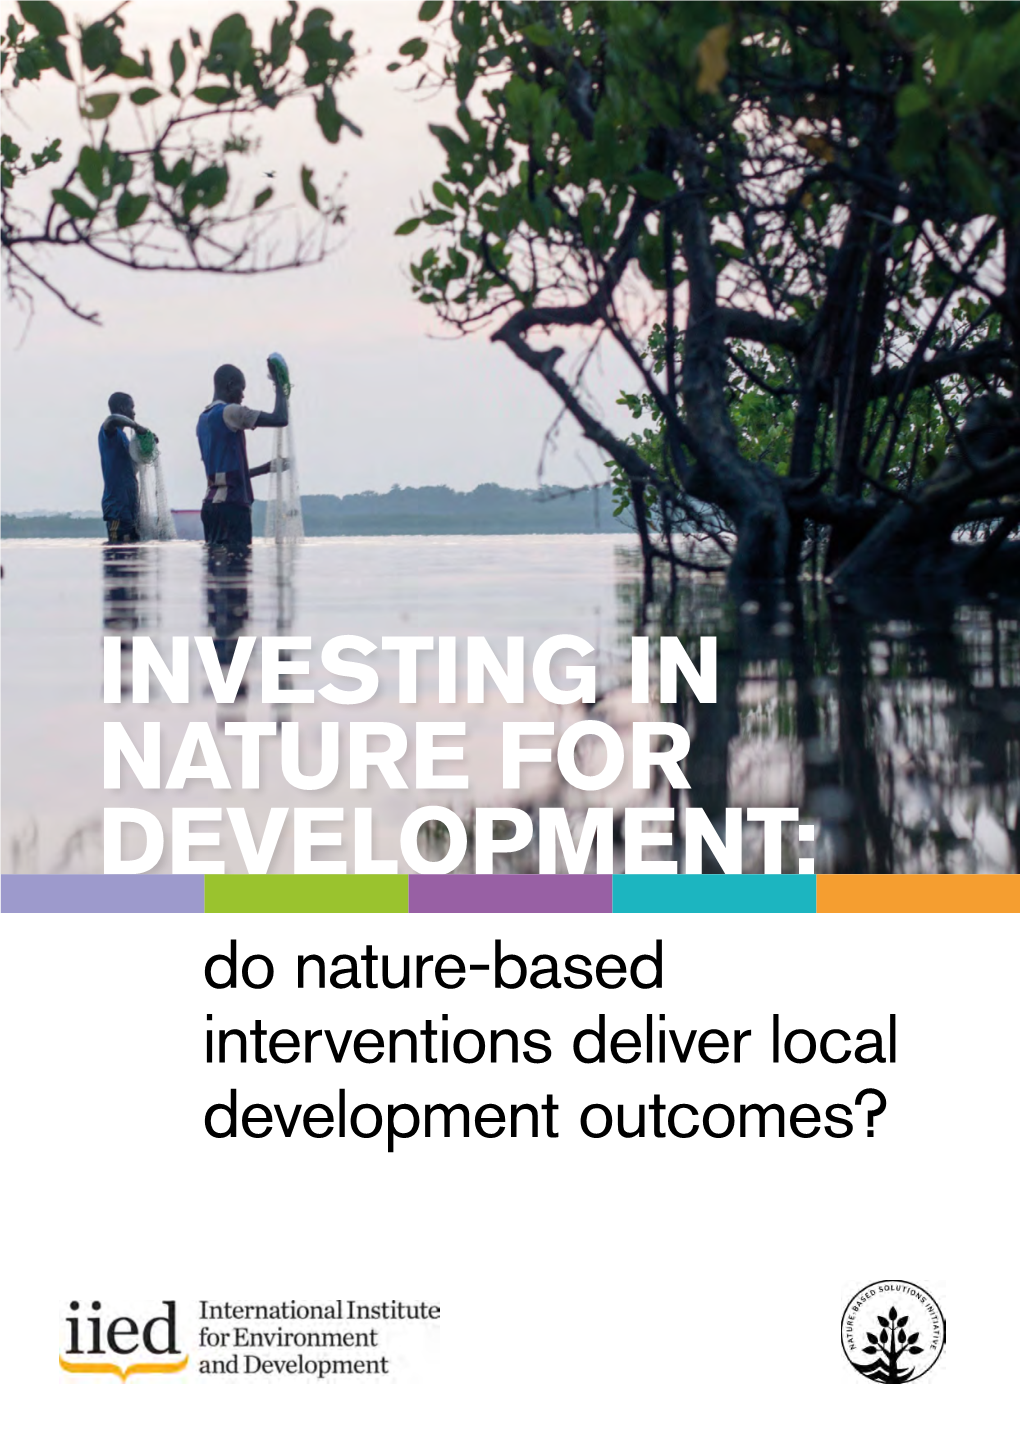 INVESTING in NATURE for DEVELOPMENT: Do Nature-Based Interventions Deliver Local Development Outcomes? Photo Credits